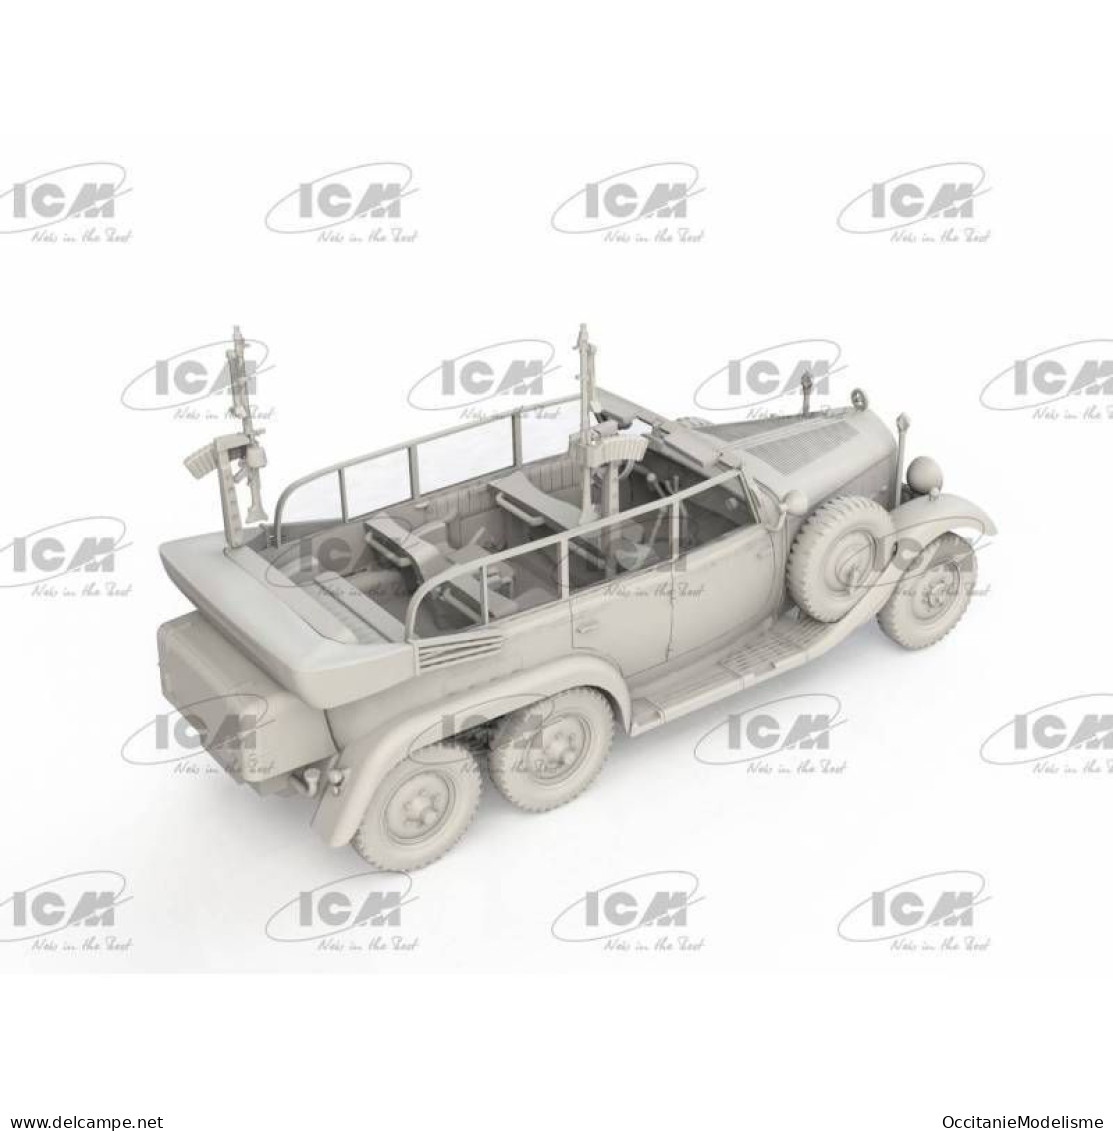 ICM - MERCEDES-BENZ TYPE G4 Partisanenwagen MG34 WWII Maquette Kit Plastique Réf. 72473 Neuf NBO 1/72 - Véhicules Militaires